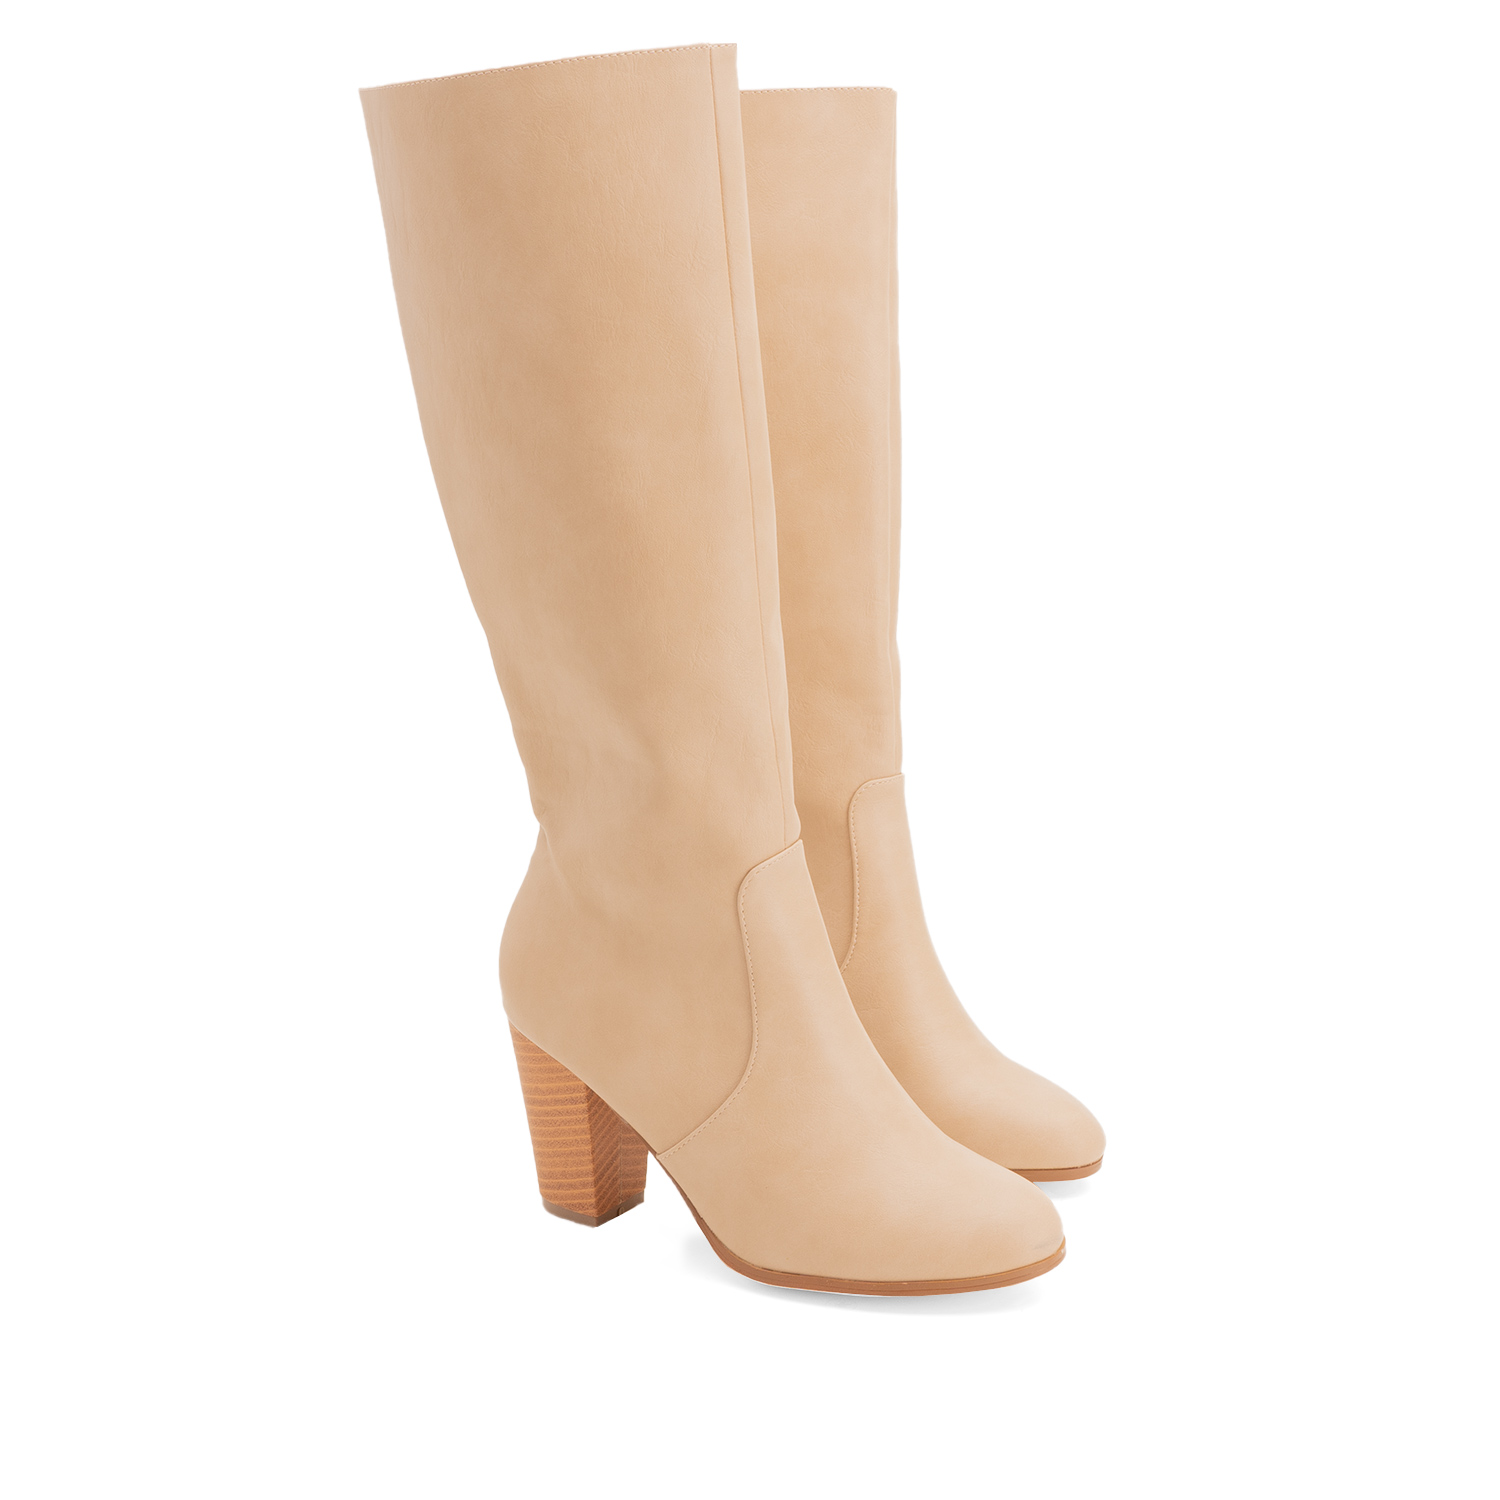 Heled mid-calf boots in off-white faux leather 